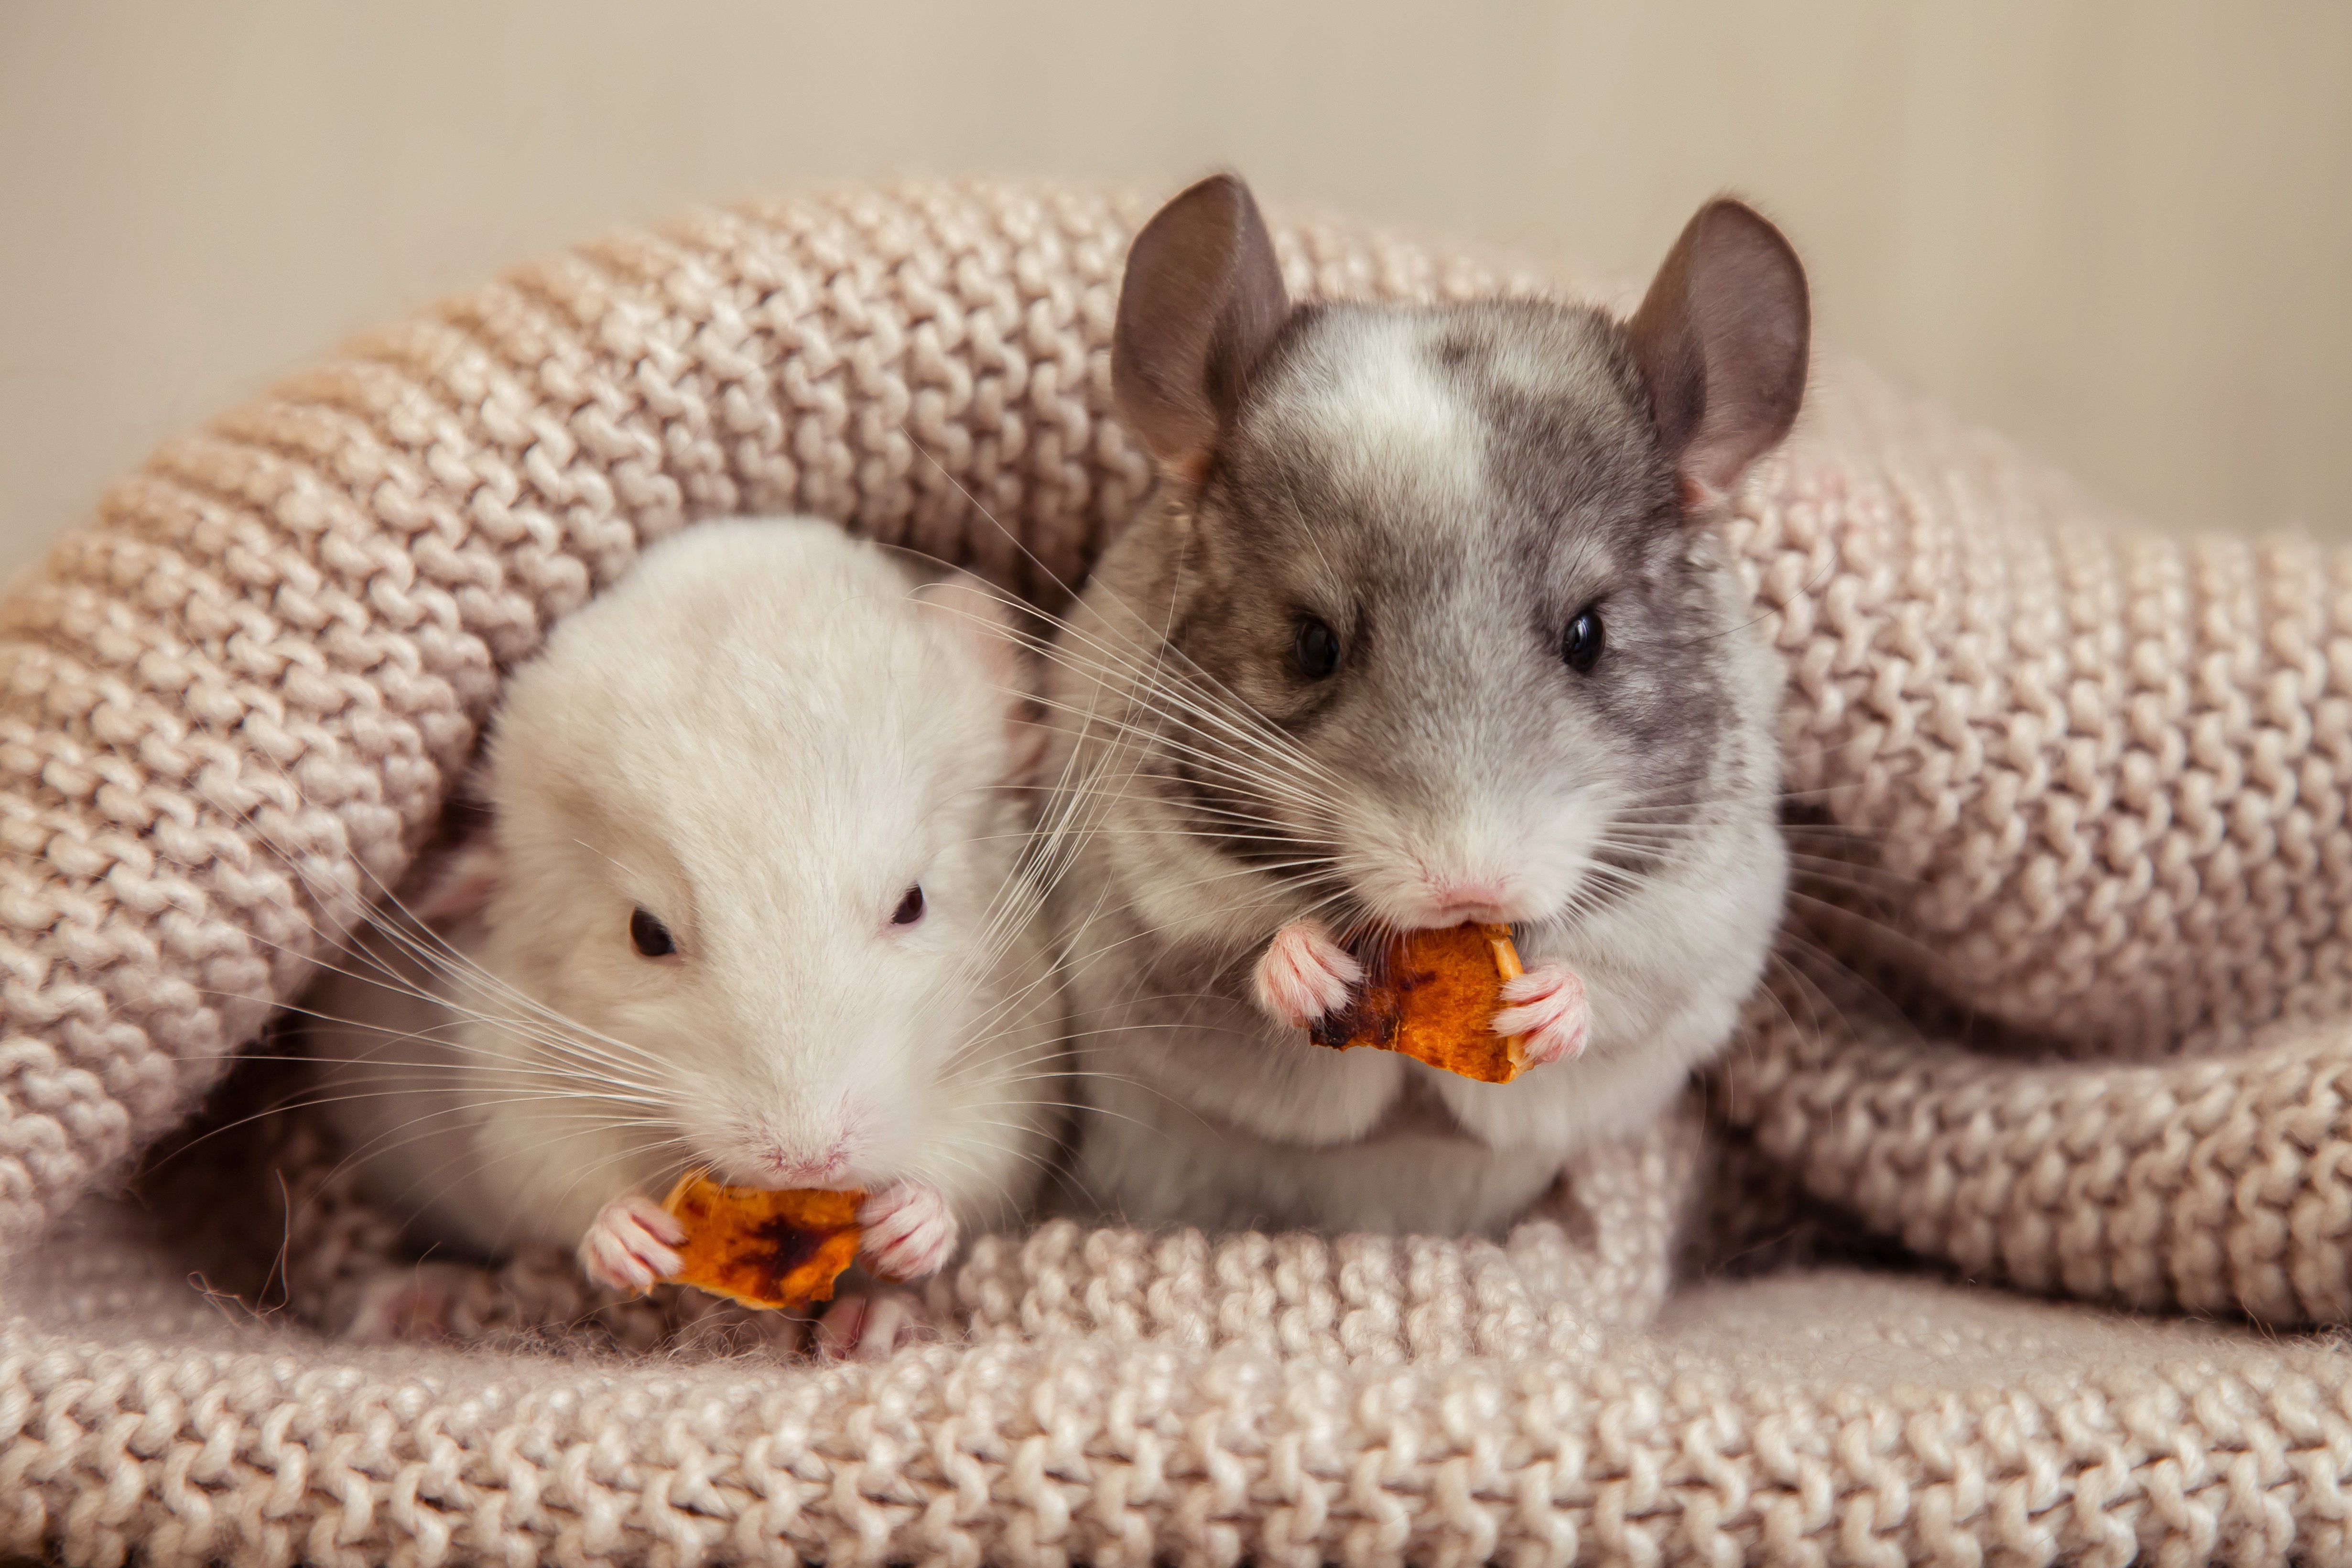 The Best Hamster Treats A Comprehensive Guide to Keeping Your Furry Friend Happy and Healthy